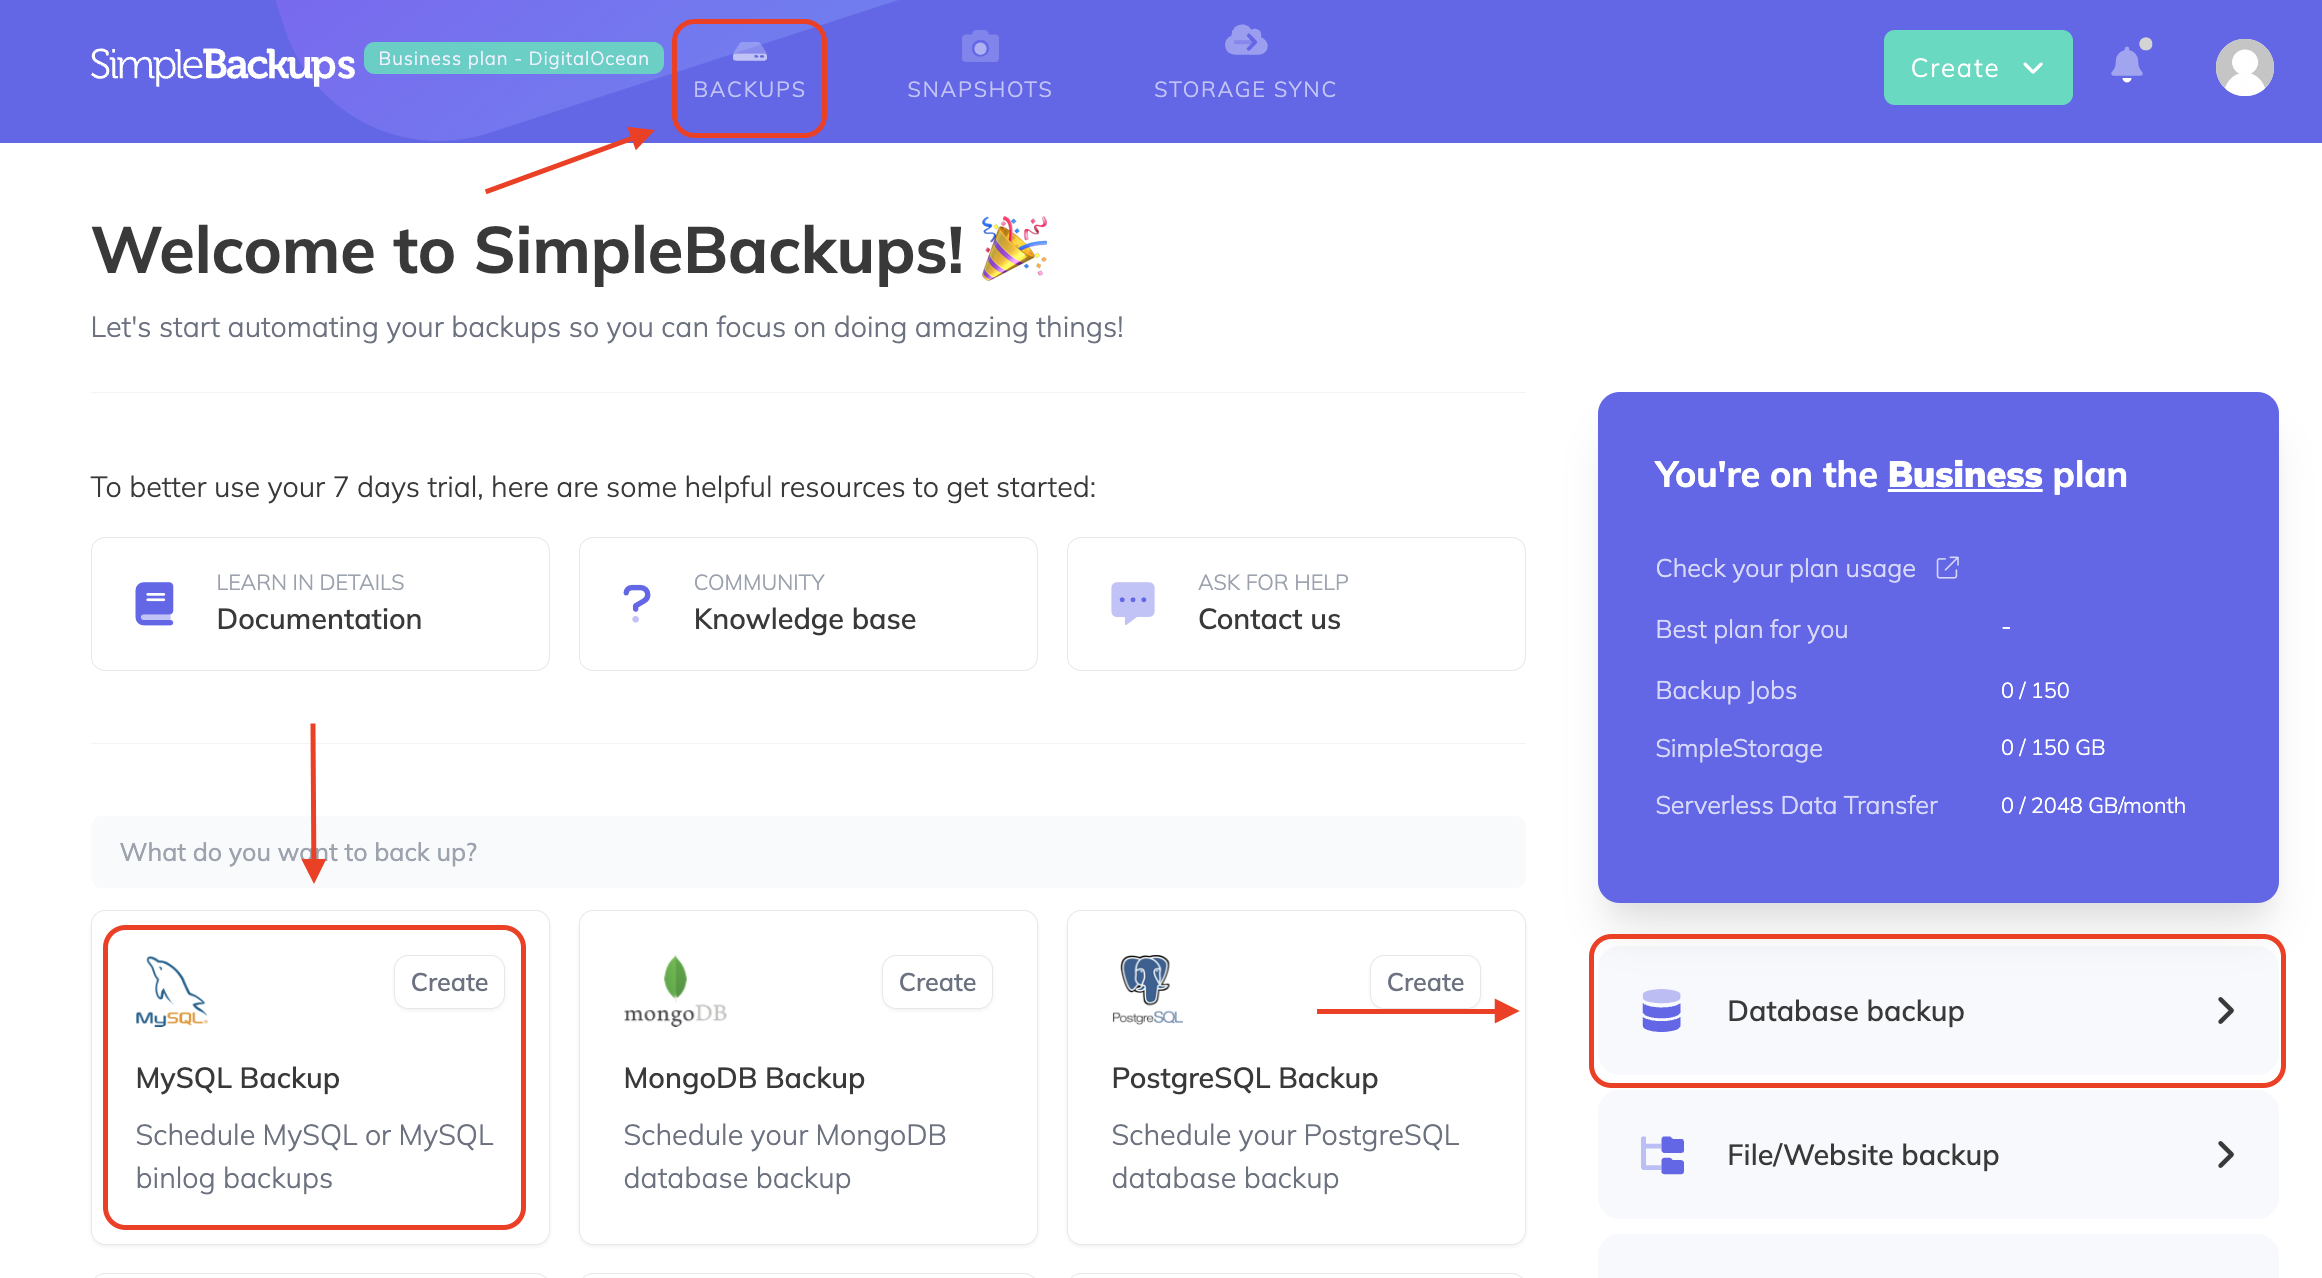 how to create a database backup in simplebackups